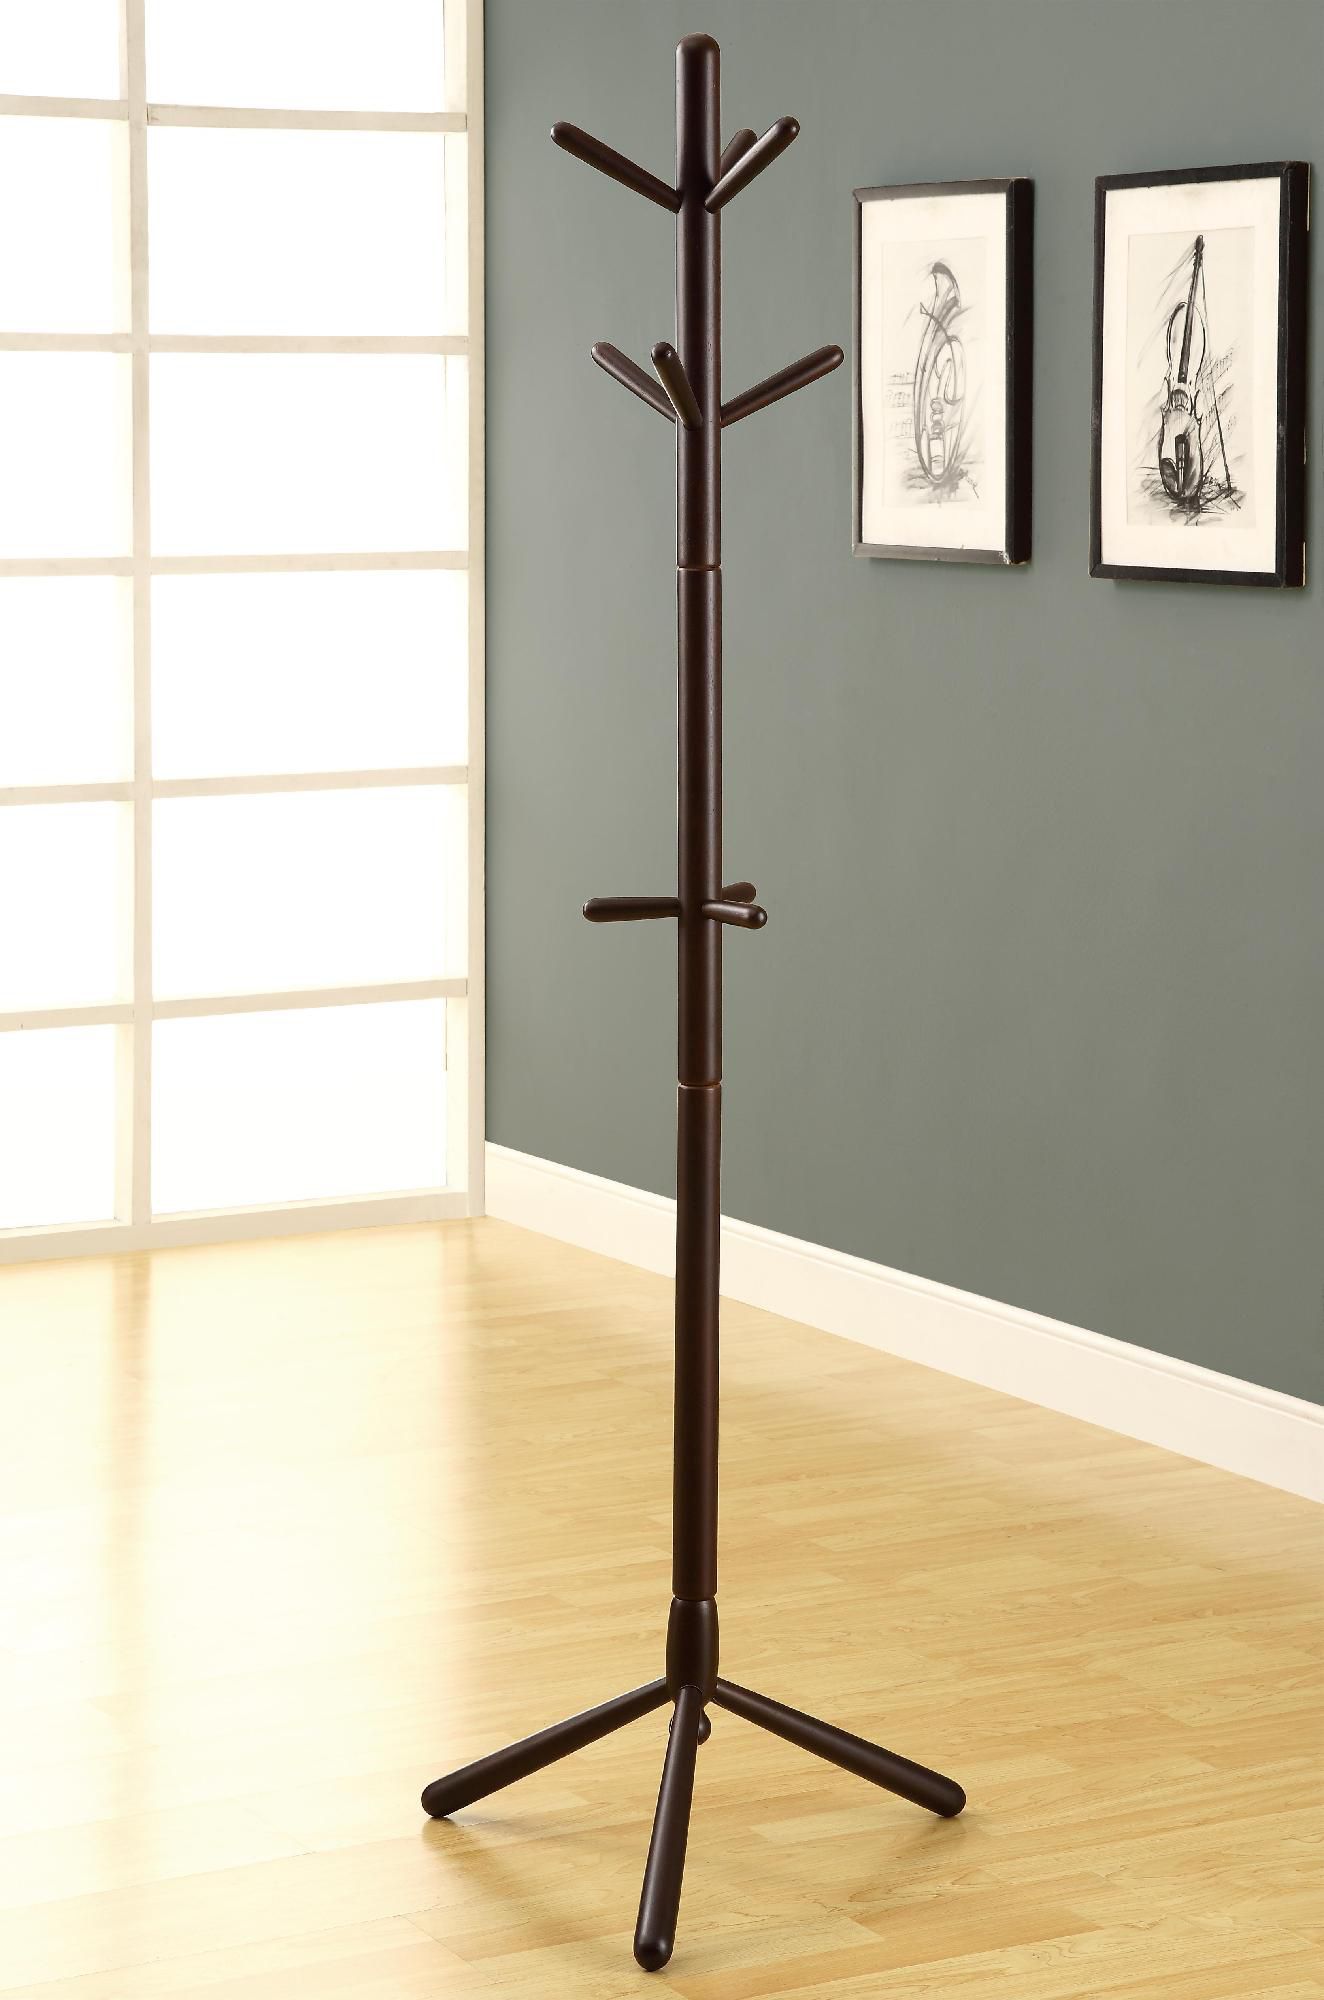 COAT RACK - 69"H / CAPPUCCINO WOOD CONTEMPORARY STYLE